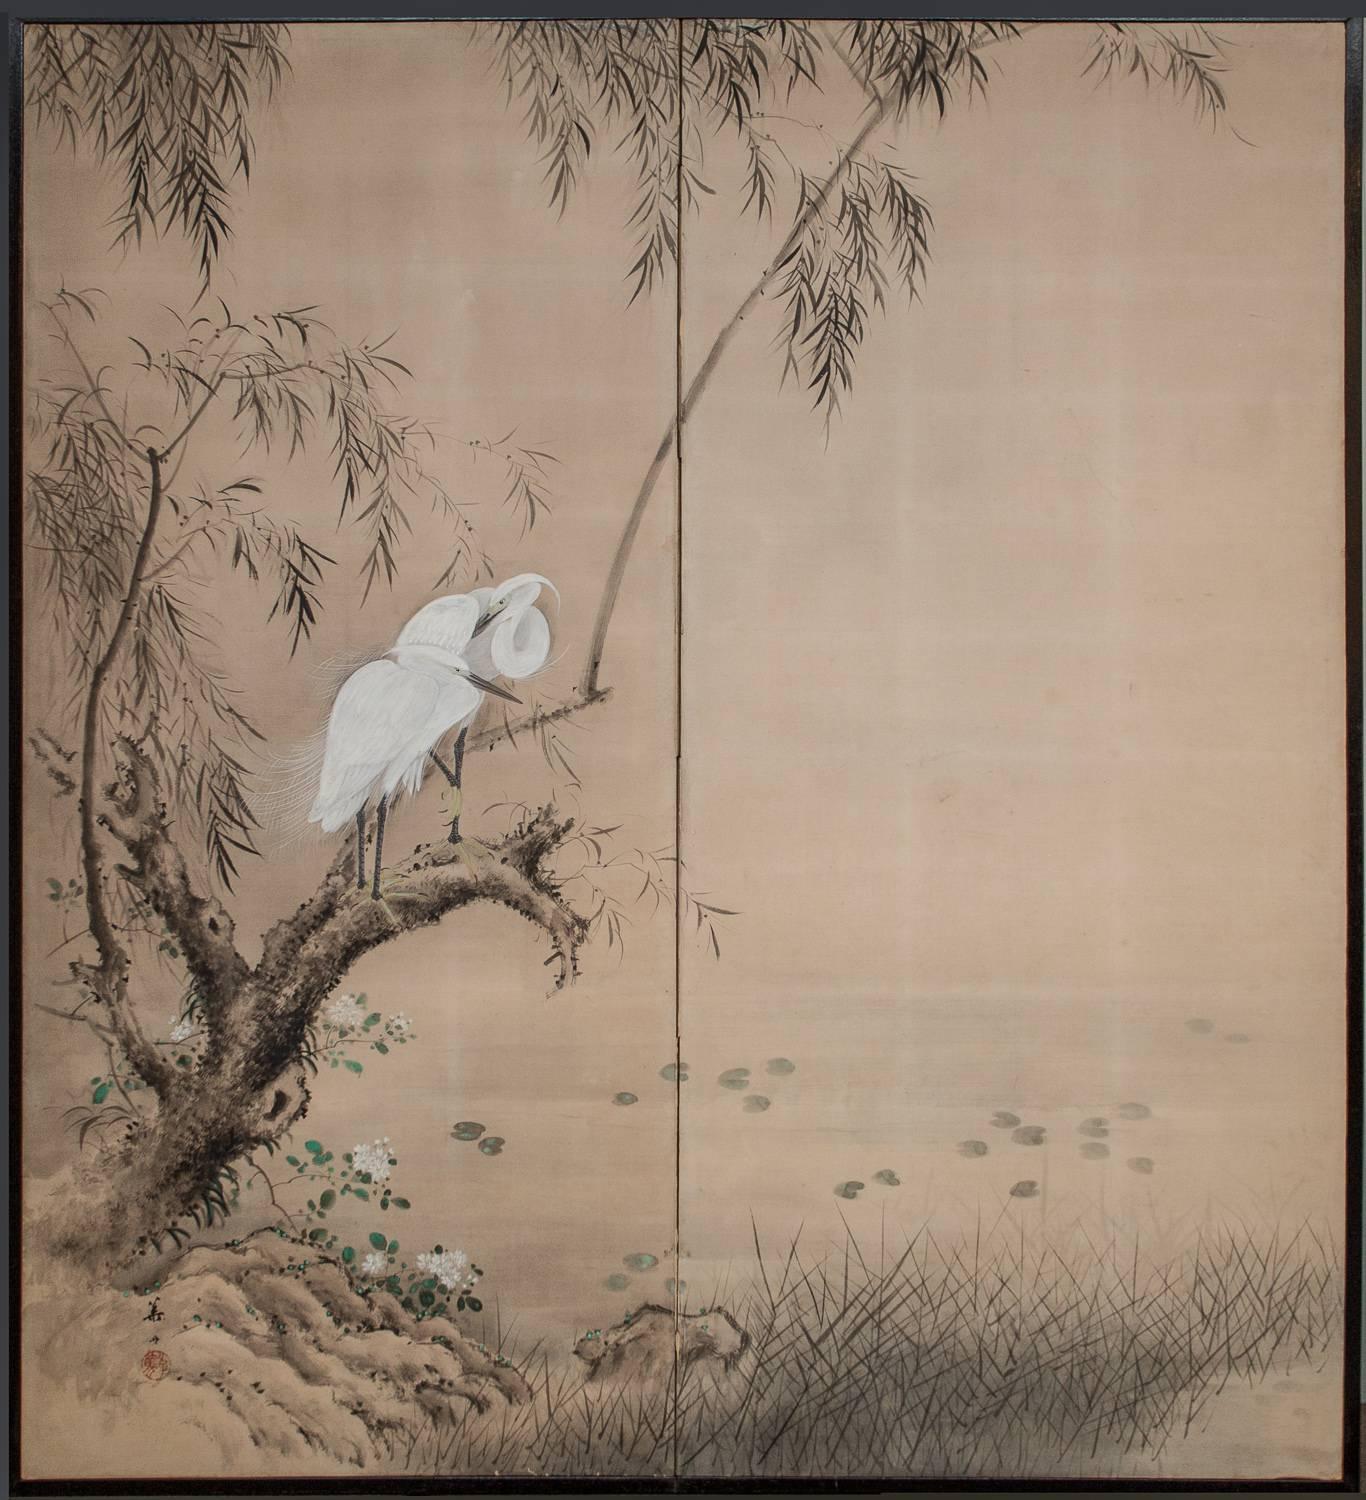 Japanese Two Panel Screen:  Herons in Willow by Pond's Edge
Mineral pigments on mulberry paper
Artist signature and seal read: Yoshi Take / Houshou
One of a pair with S1515B, sold separately